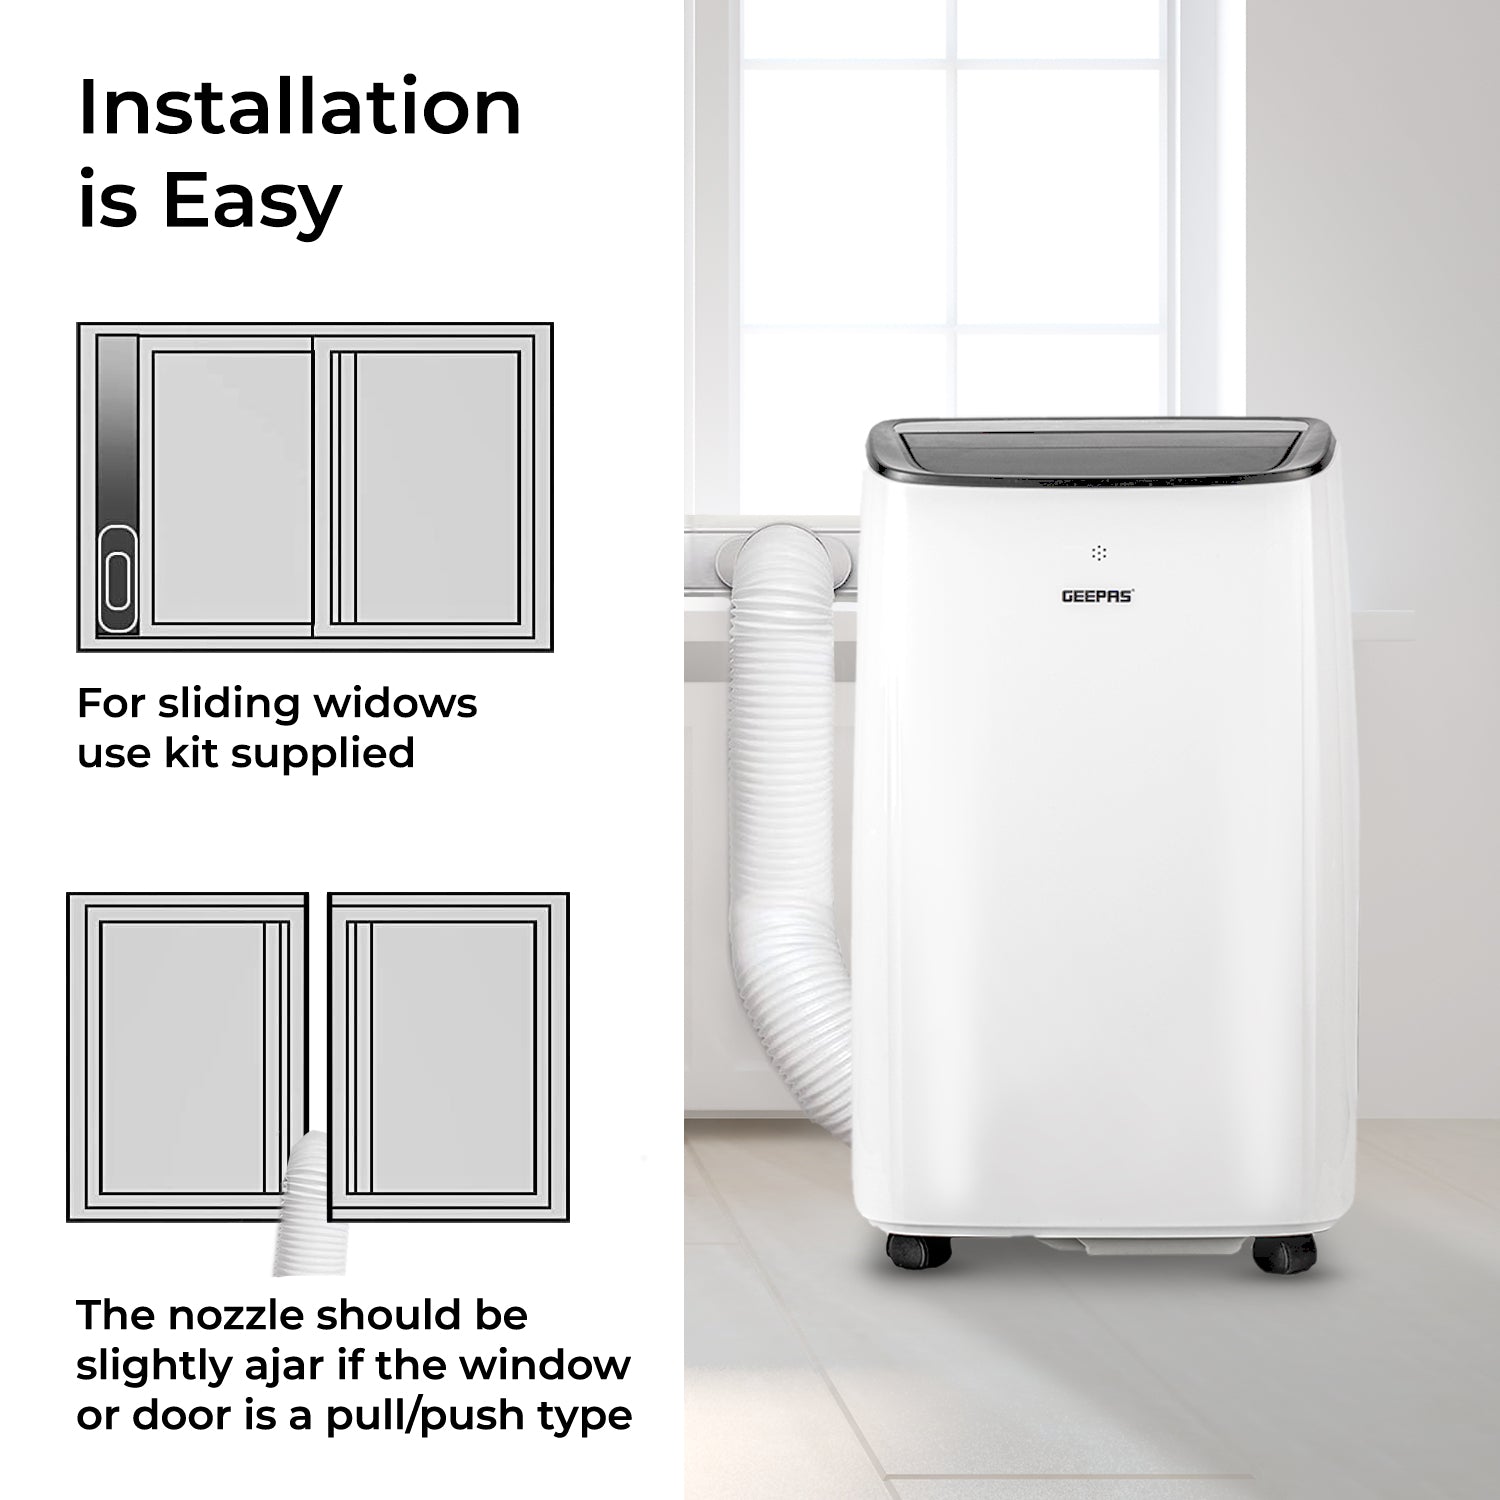 This image shows off the super simple installation process of the portable air conditioning unit using the window venting kit.